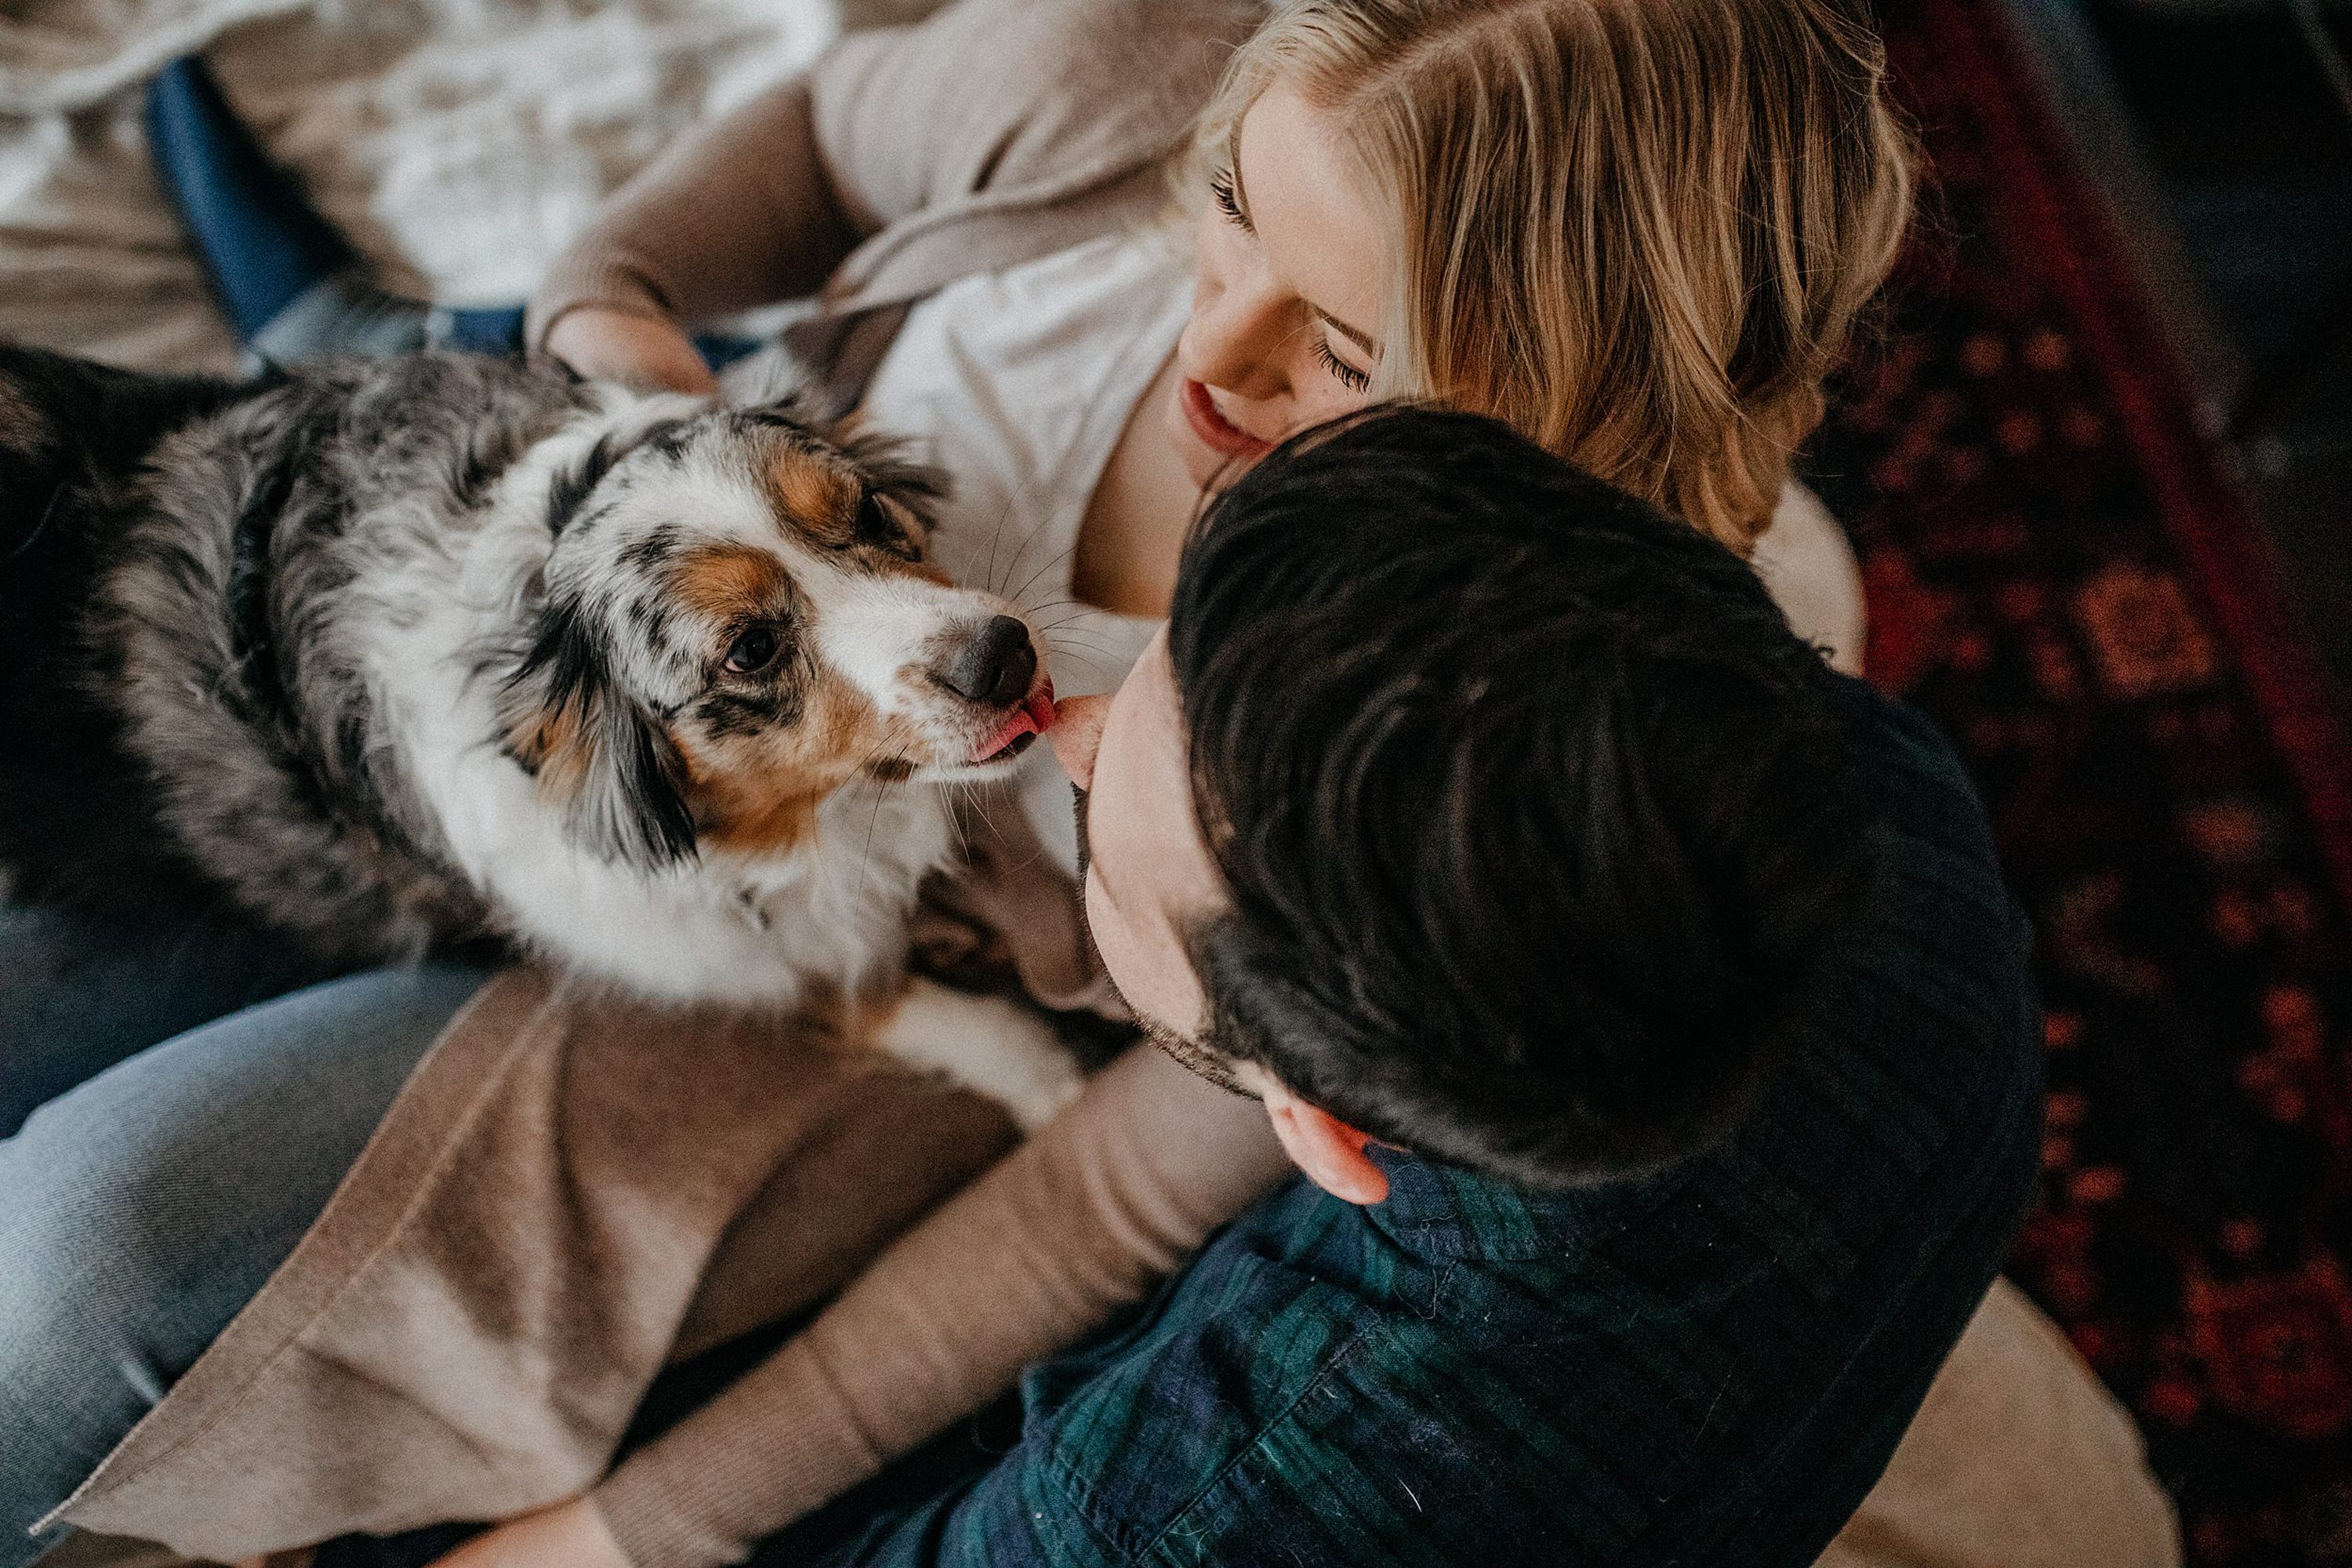 cute couples photos,in home engagement session,candid engagement session,winter engagement session,living room engagement session,engagement photos with dog,couples photos with dog